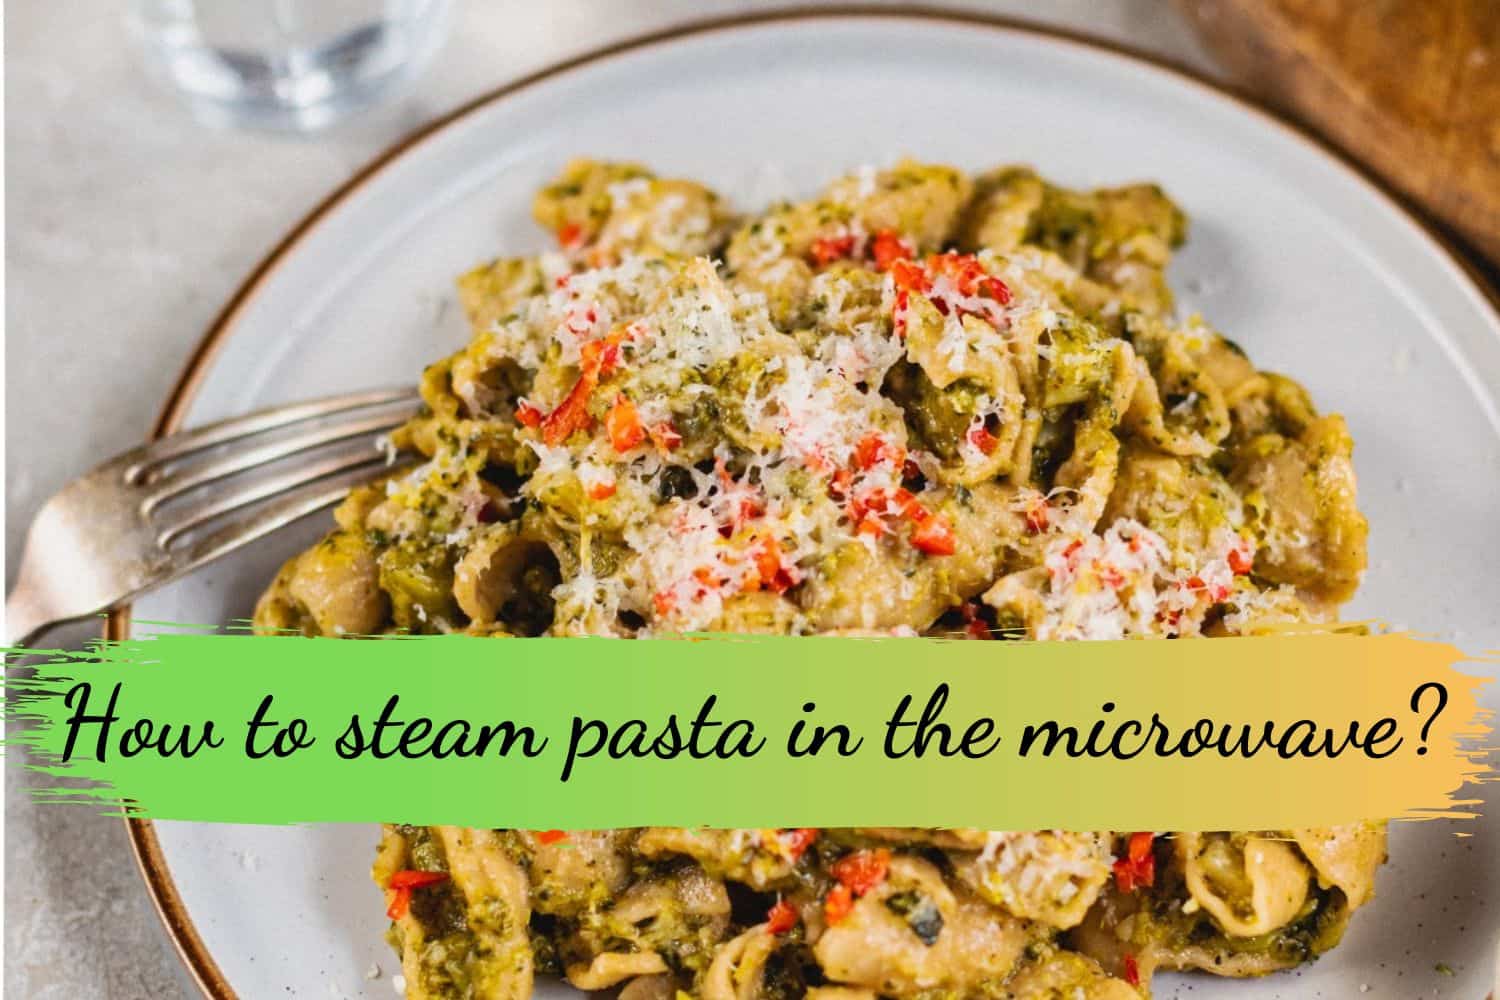 How to steam pasta in the microwave?